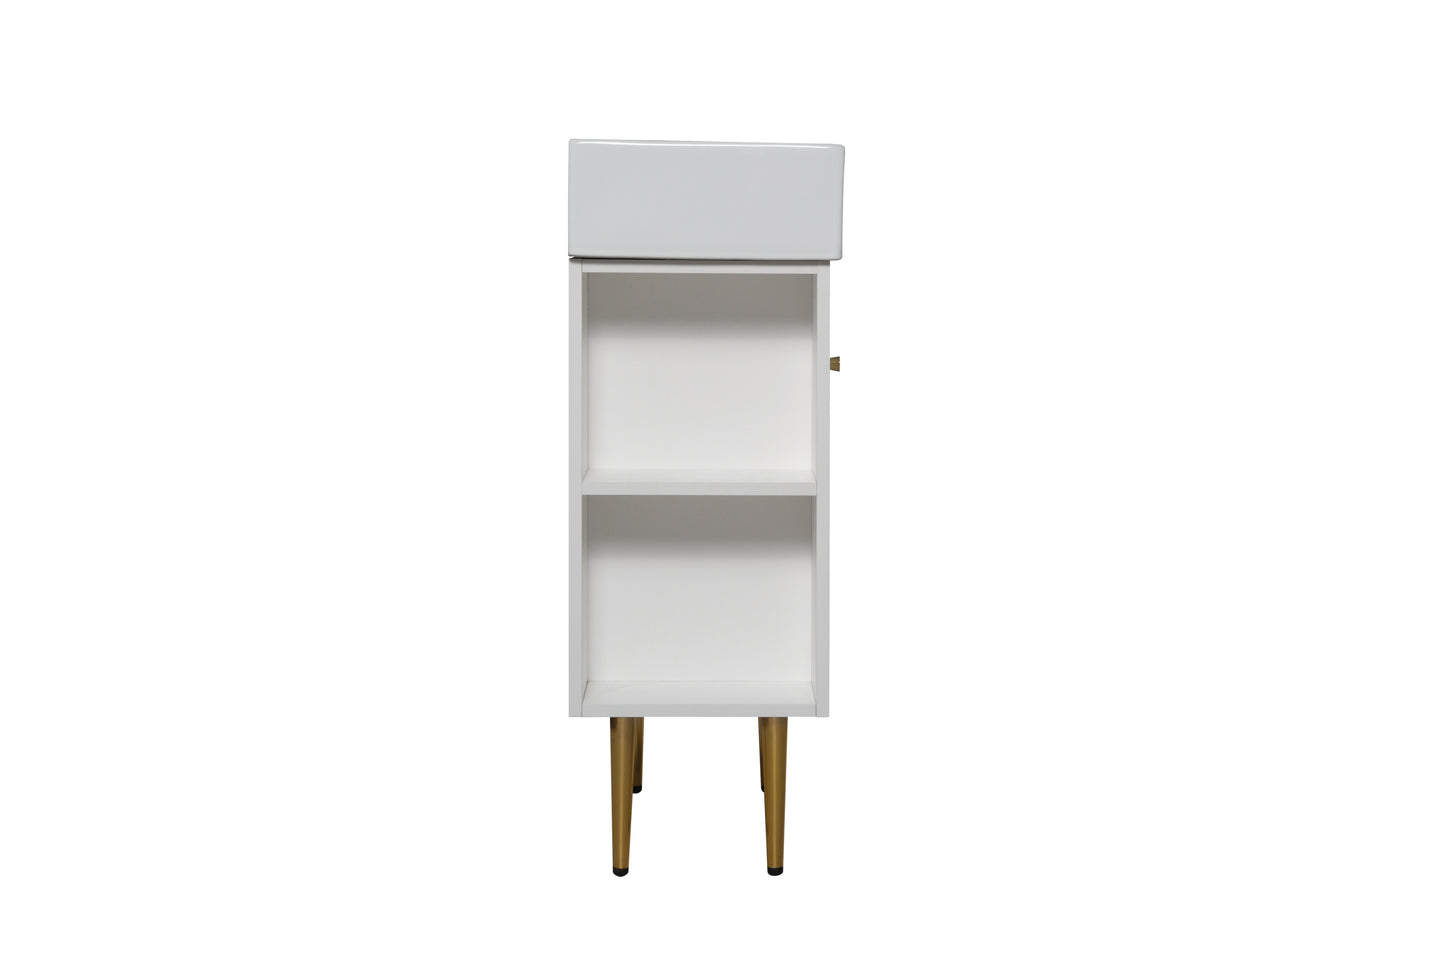 21.6" Open-shelving Bathroom Vanity with Ceramic Sink, Cloakroom Open Shelf Storage Cabinet, White Ceramic Countertop with Soft-Closing Door on the Right Side, 23VB06-21WHR